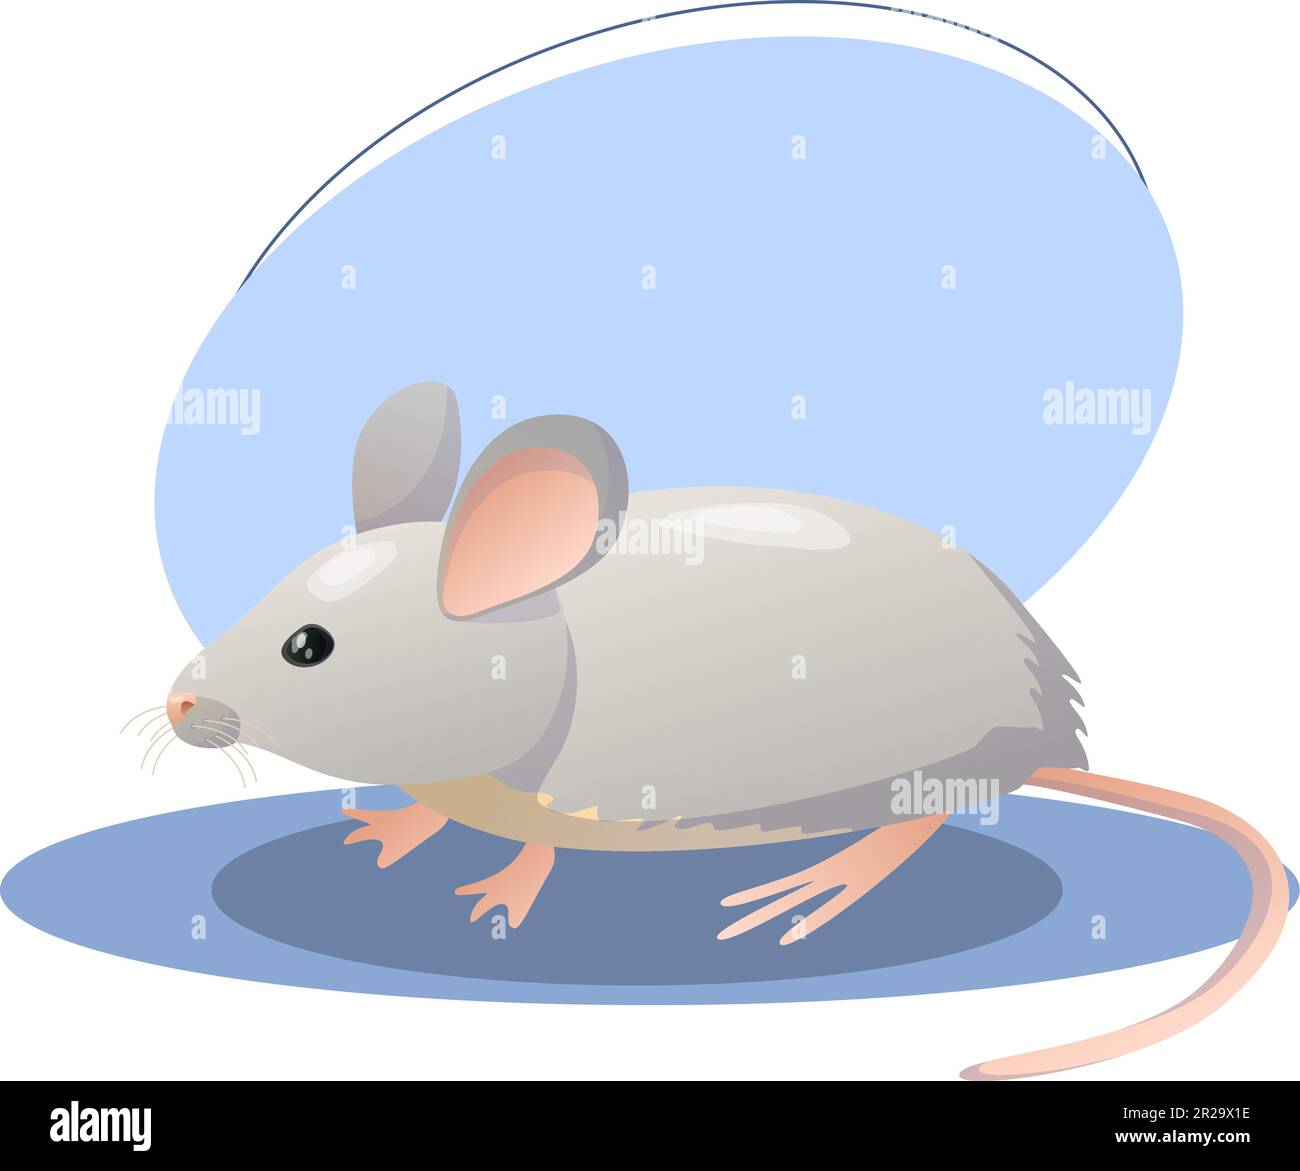 Mouse illustration. Animal, ears, tail, nose. Editable vector graphic design. Stock Vector